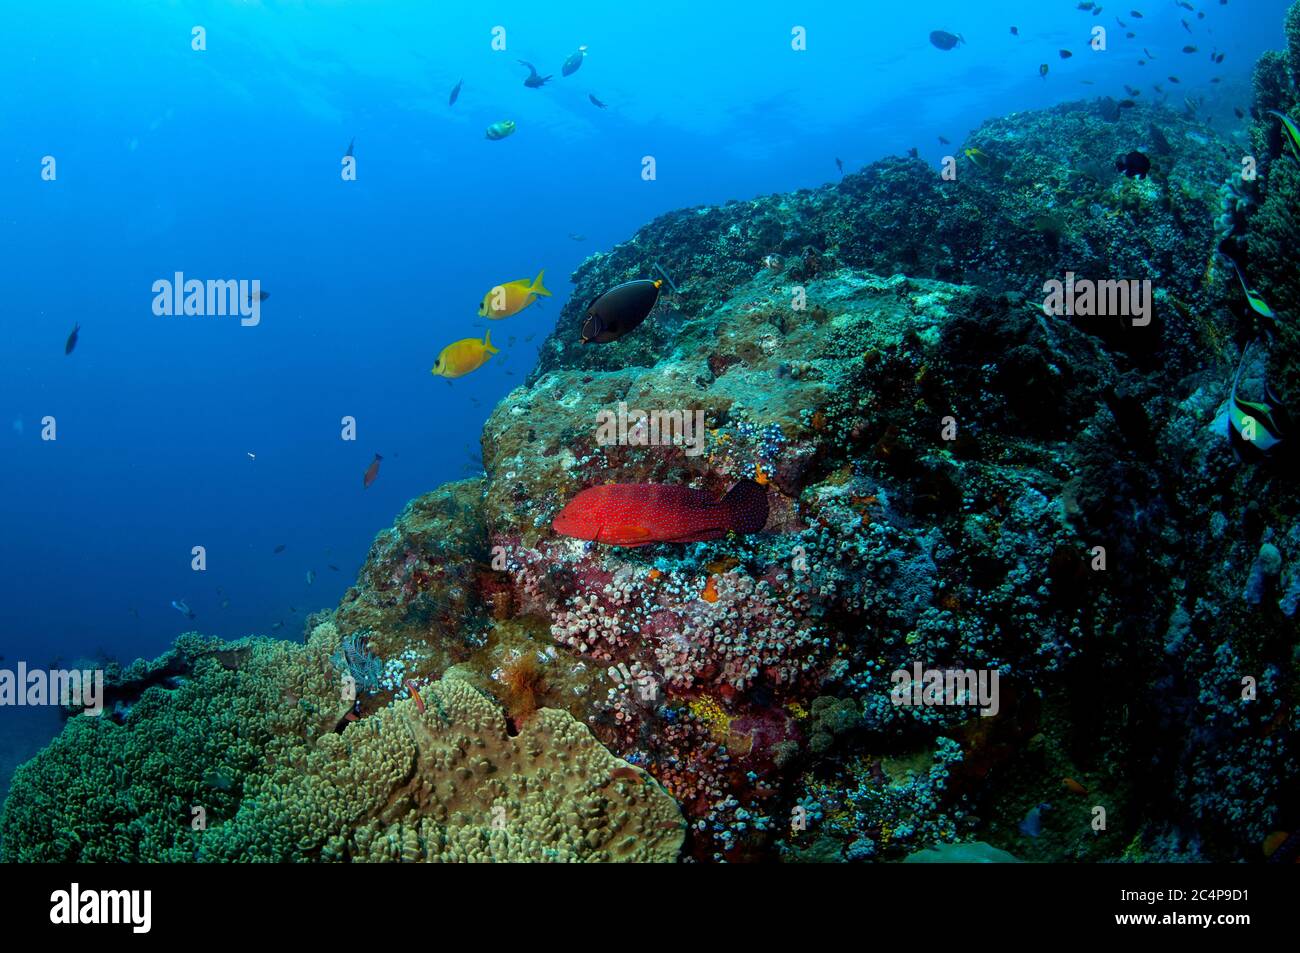 Coral grouper, Cephalopholis miniata, a pair of coral rabbitfish, Siganus corallinus, and ringtail surgeonfish, Acanthurus blochii, in a coral reef, K Stock Photo